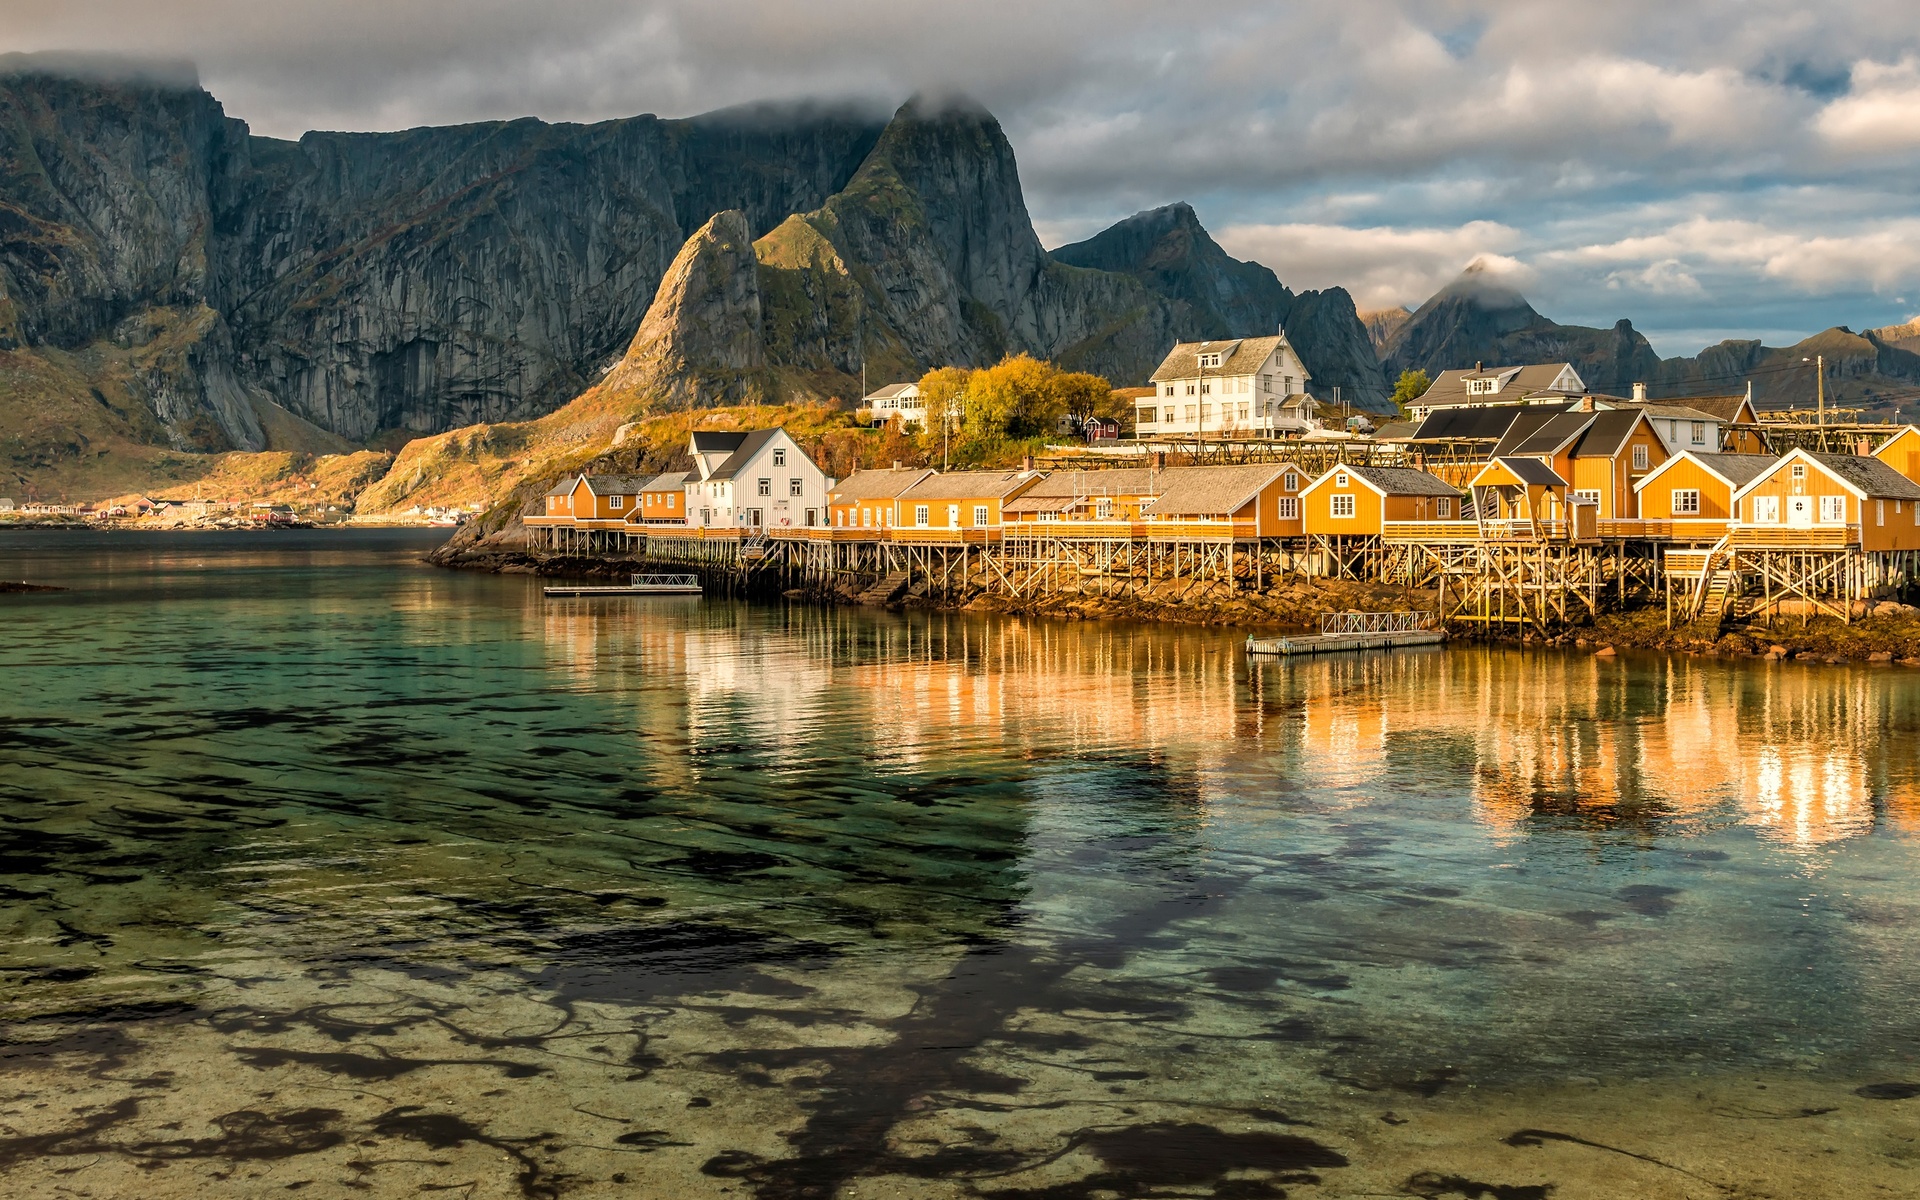 the sky, water, clouds, reflection, landscape, mountains, nature, rocks, shore, tops, the bottom, boats, norway, houses, pond, the village, piles, the lofoten islands